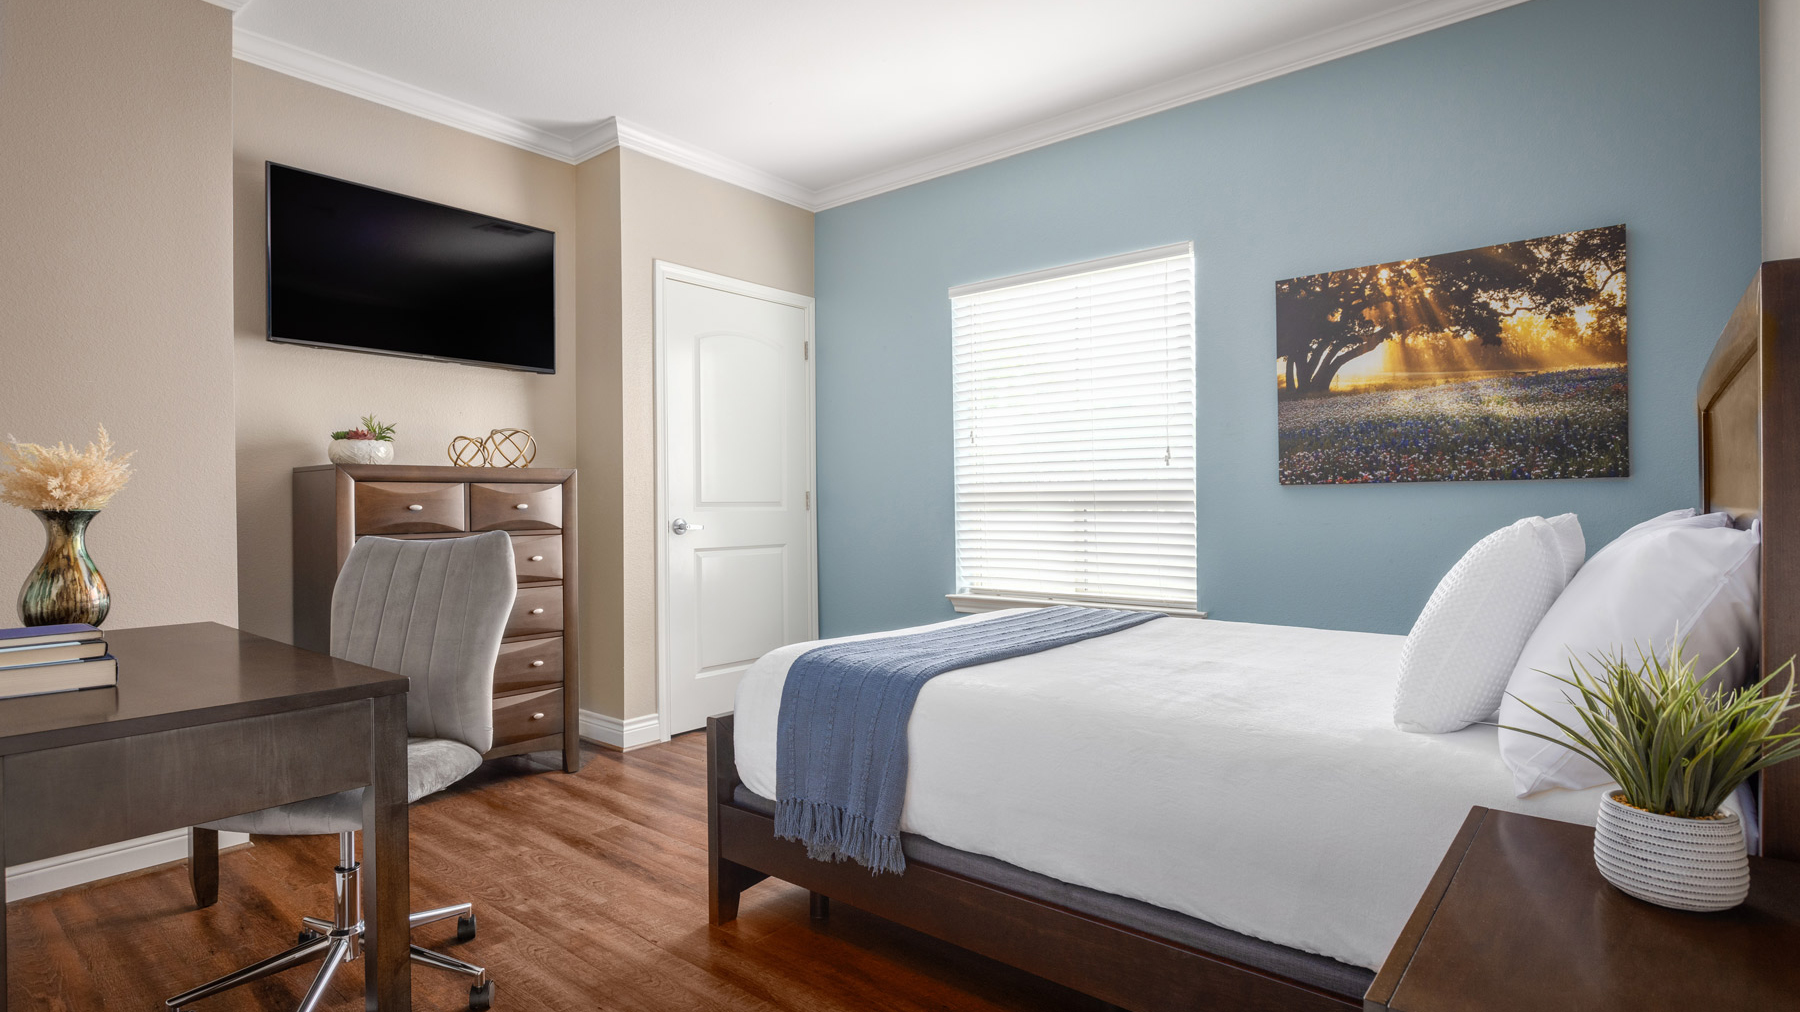 Bedroom at Restored Path Detox where our patients can safely withdrawal from substance use disorders.